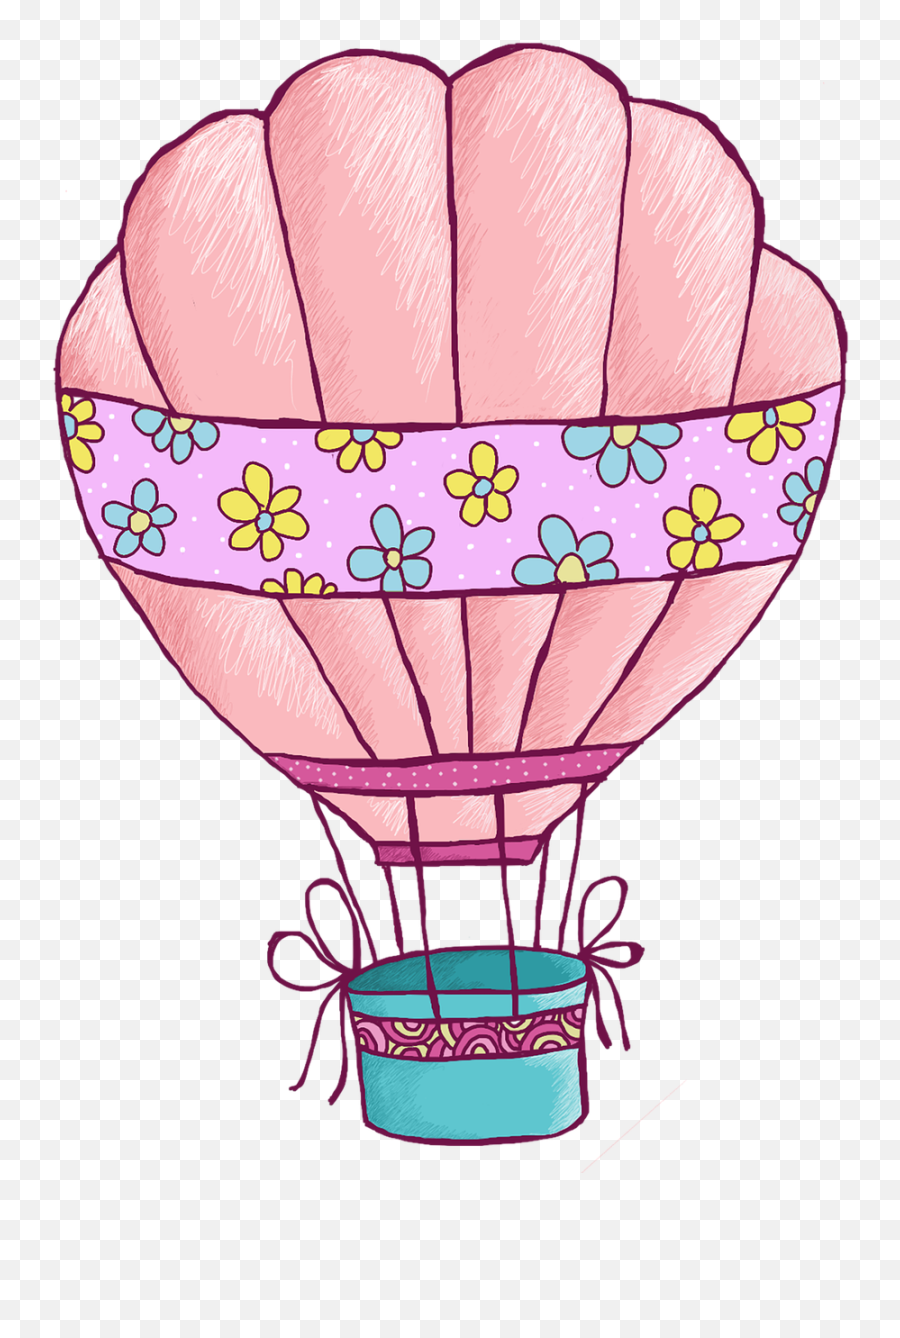 Hot Air Balloon Clip Art Design - Free Image On Pixabay Clip Art Hot Air Balloon Png,Balloon Clipart Png